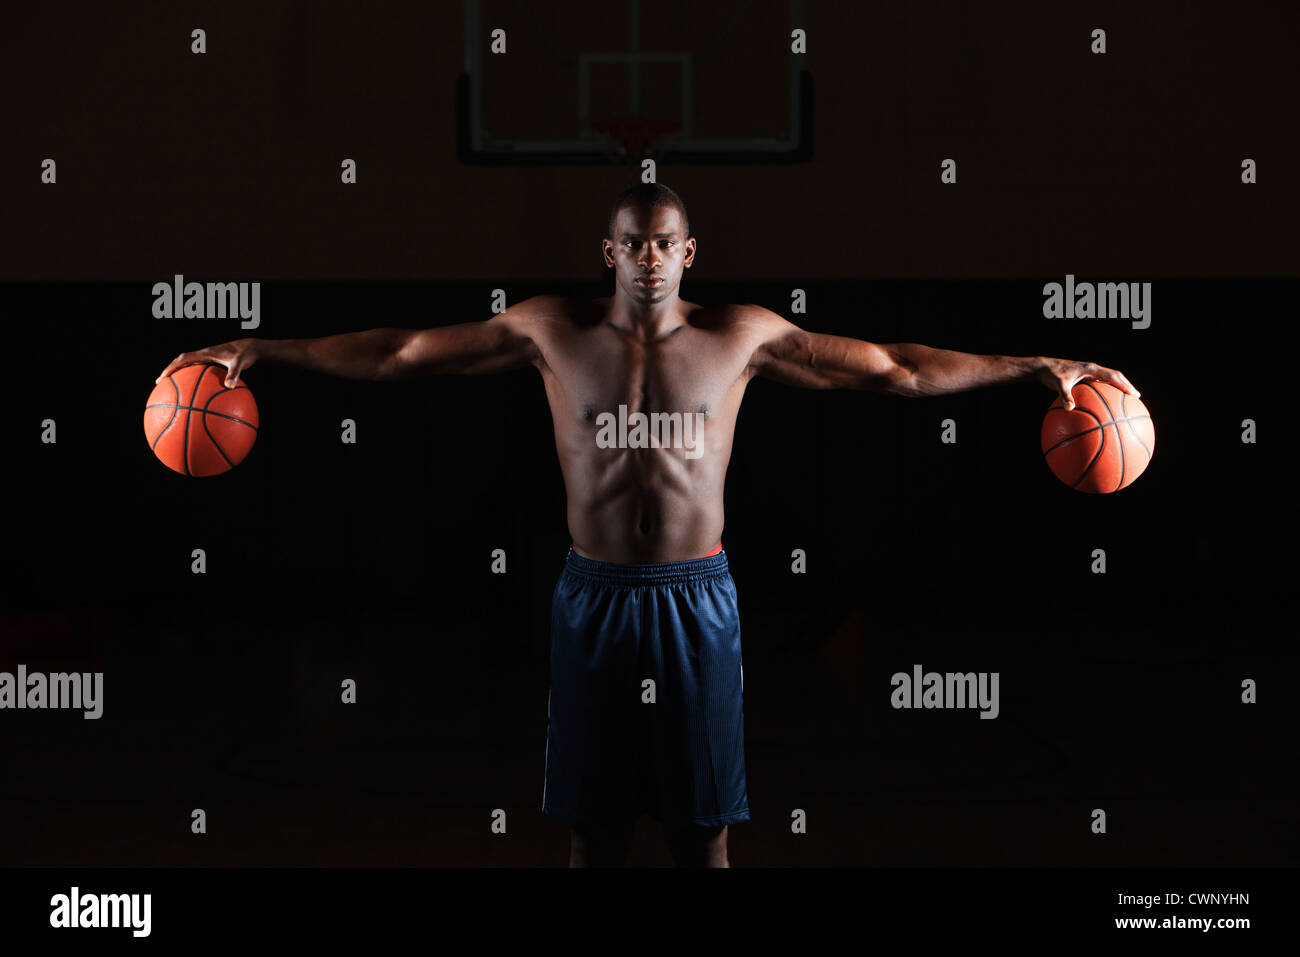 Barechested basketball player holding basketballs in both hands Stock Photo